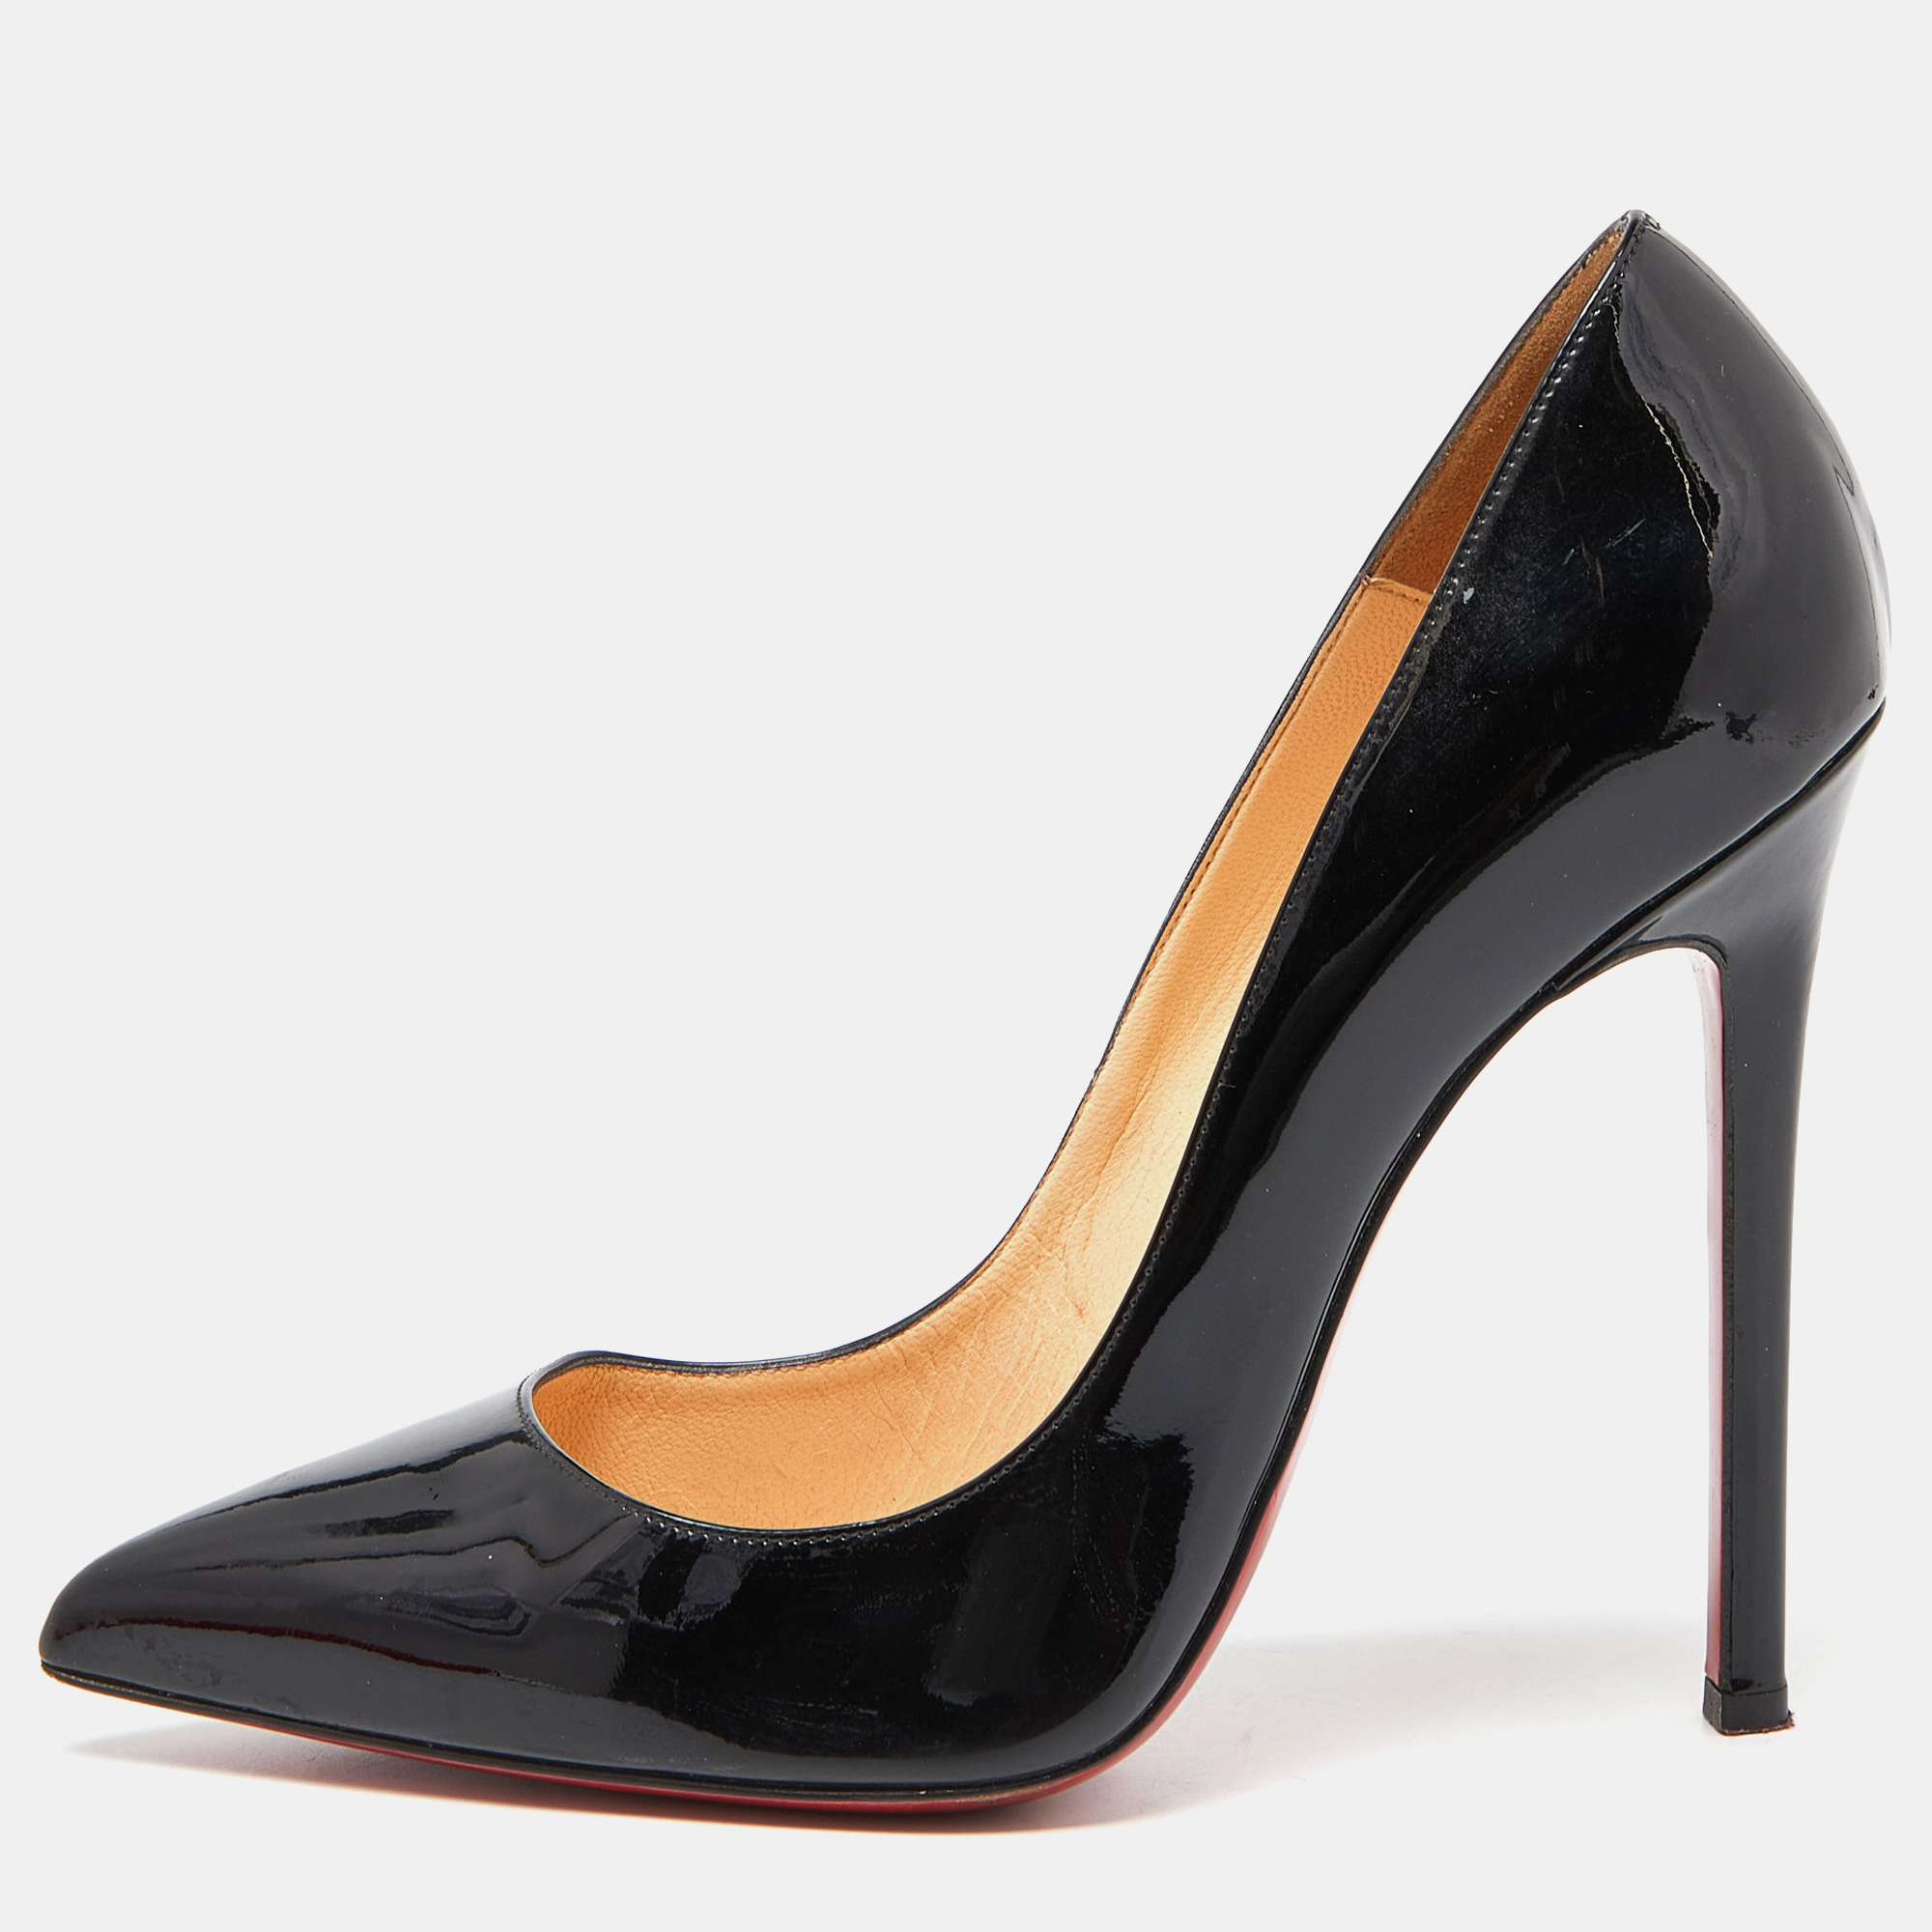 Christian Louboutin Black Patent Leather Pigalle Pointed Toe Pumps Size 39.5